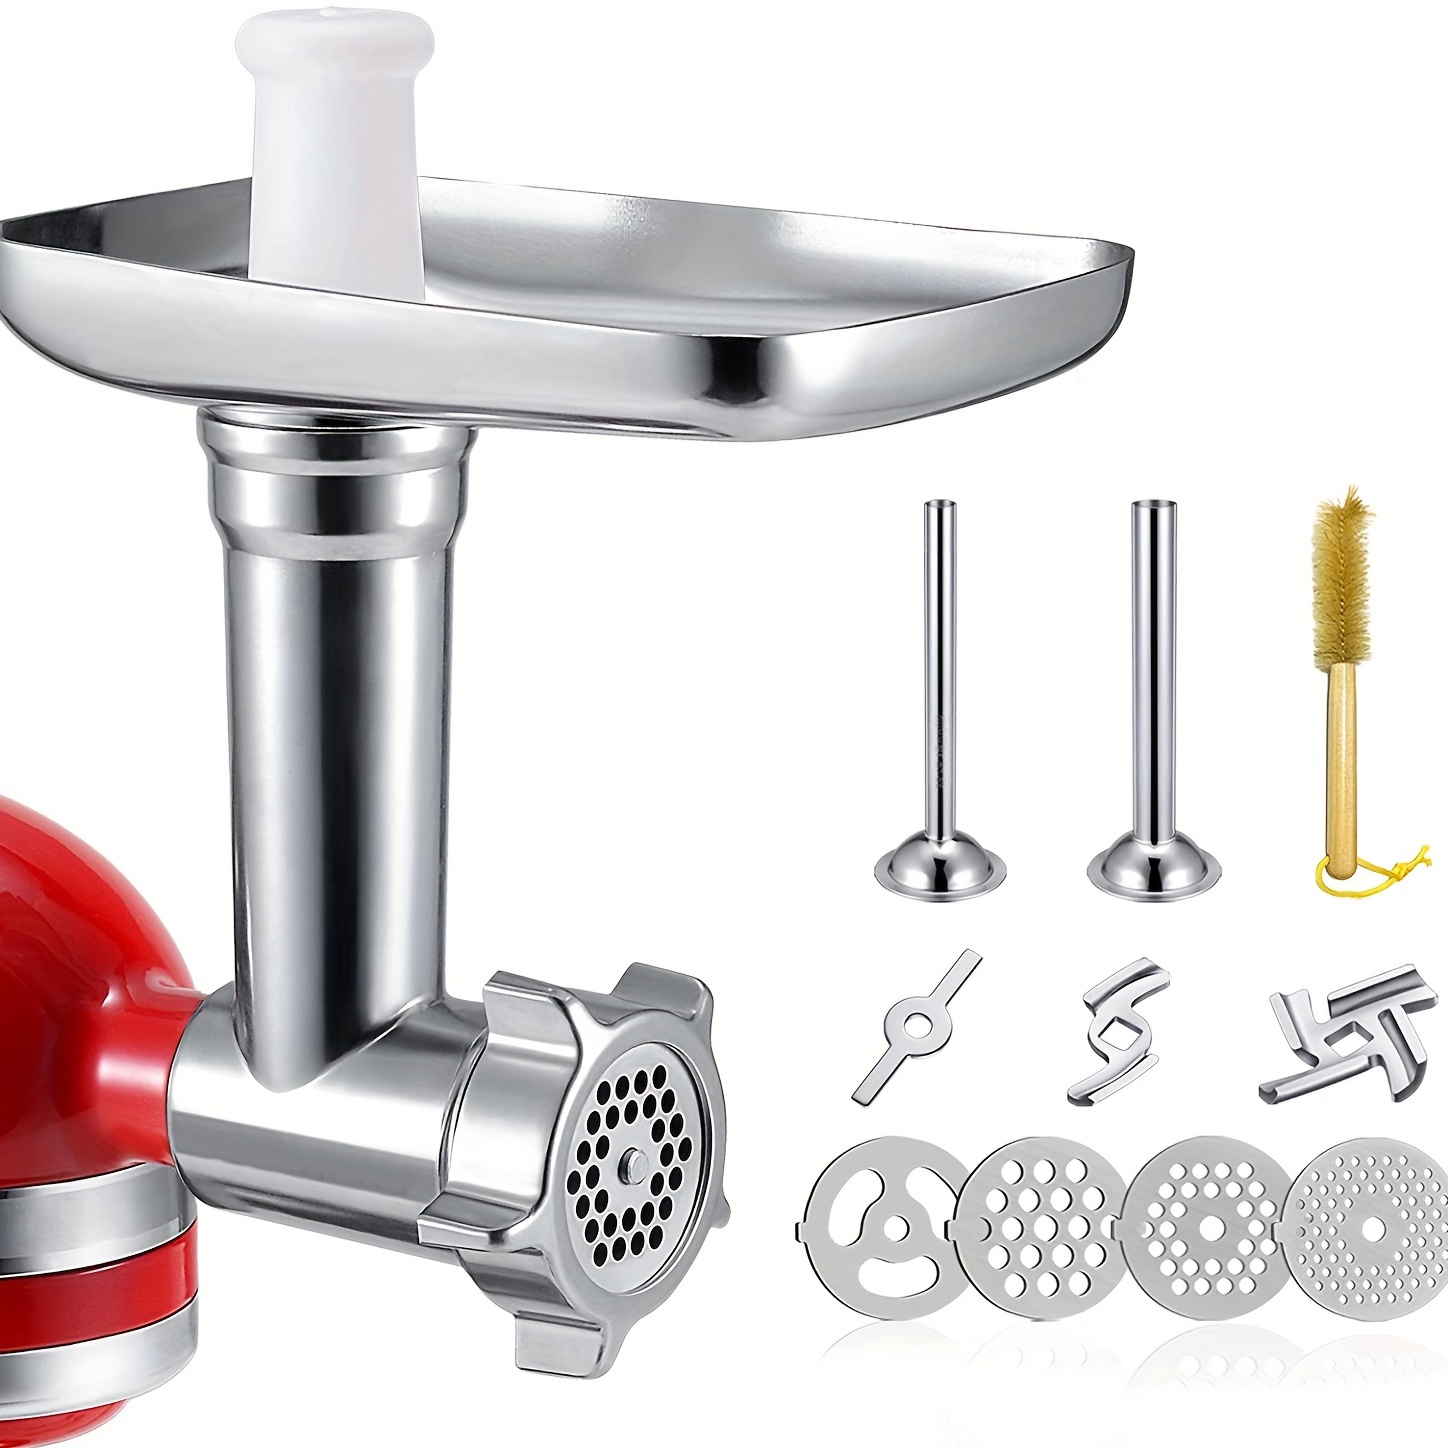 Includes Food Grinder Attachment and Sausage Stuffer Tubes, Compatible with  KitchenAid Stand Mixers